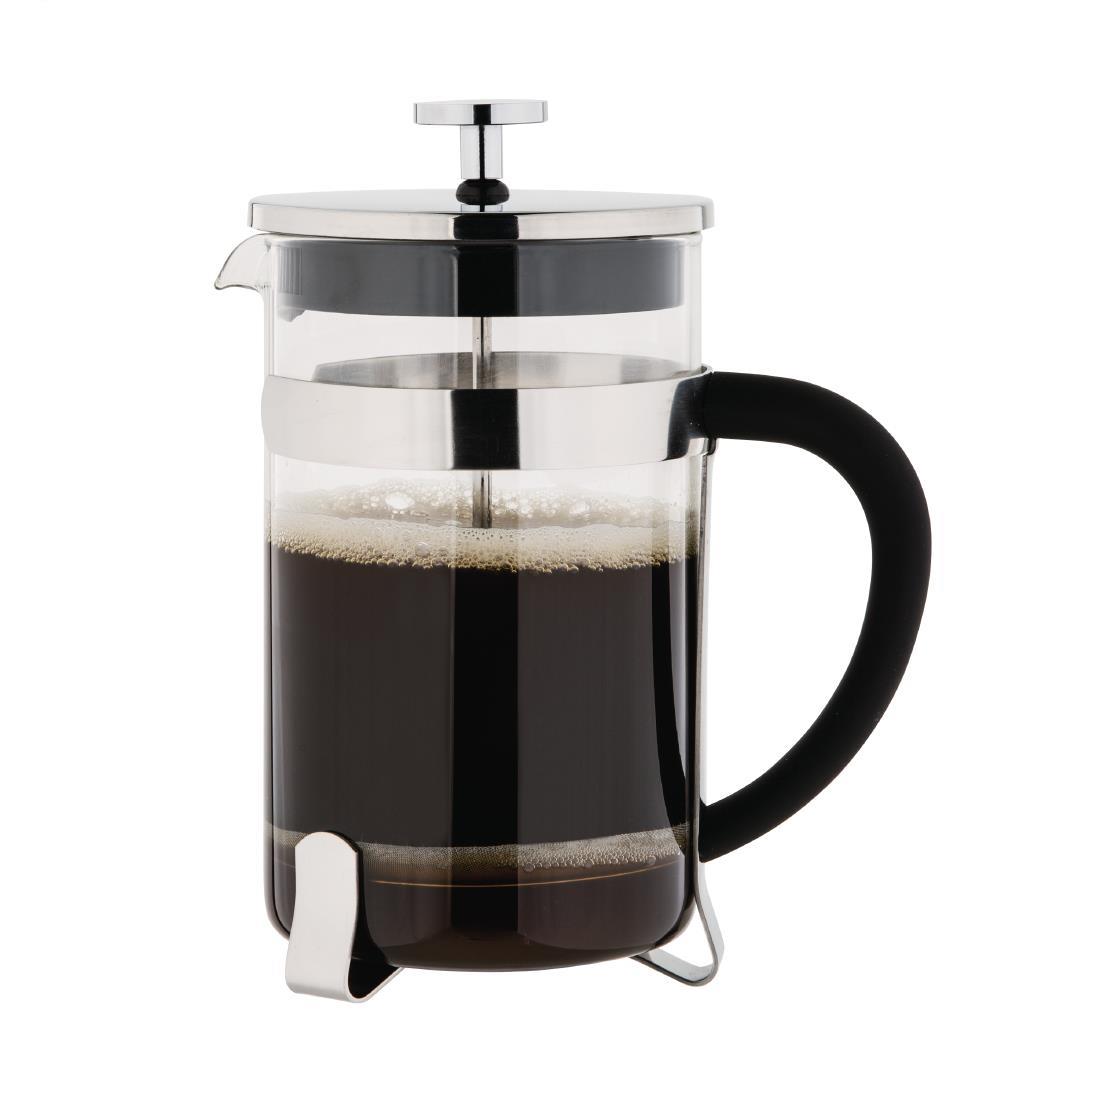 Olympia Contemporary Glass Cafetiere 6 Cup - GF231  - 2